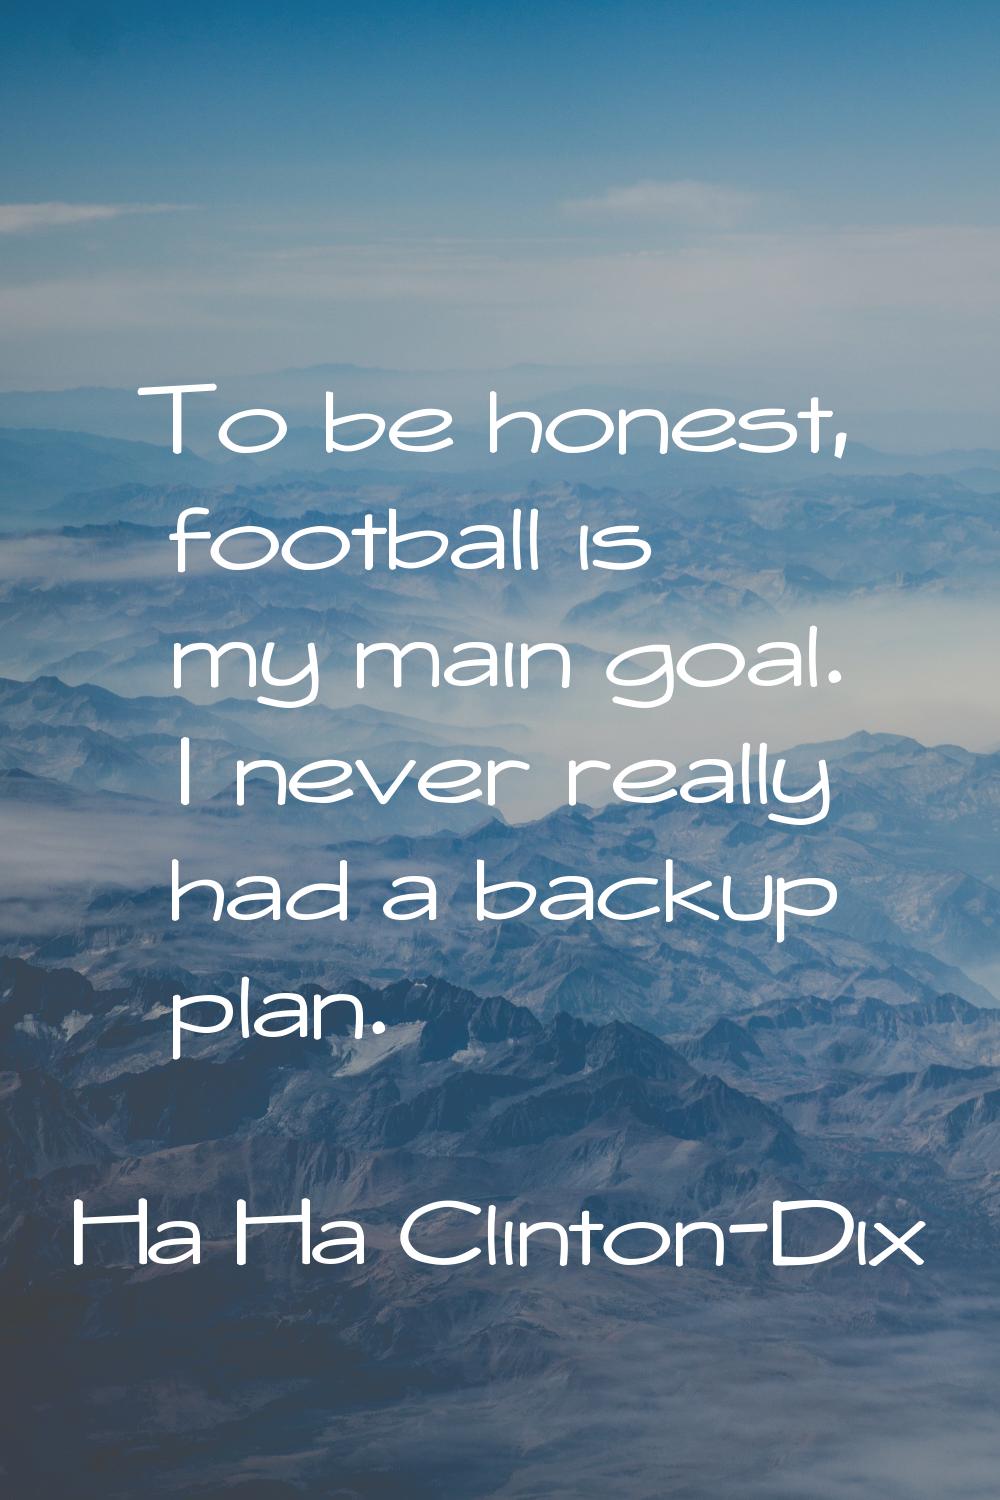 To be honest, football is my main goal. I never really had a backup plan.